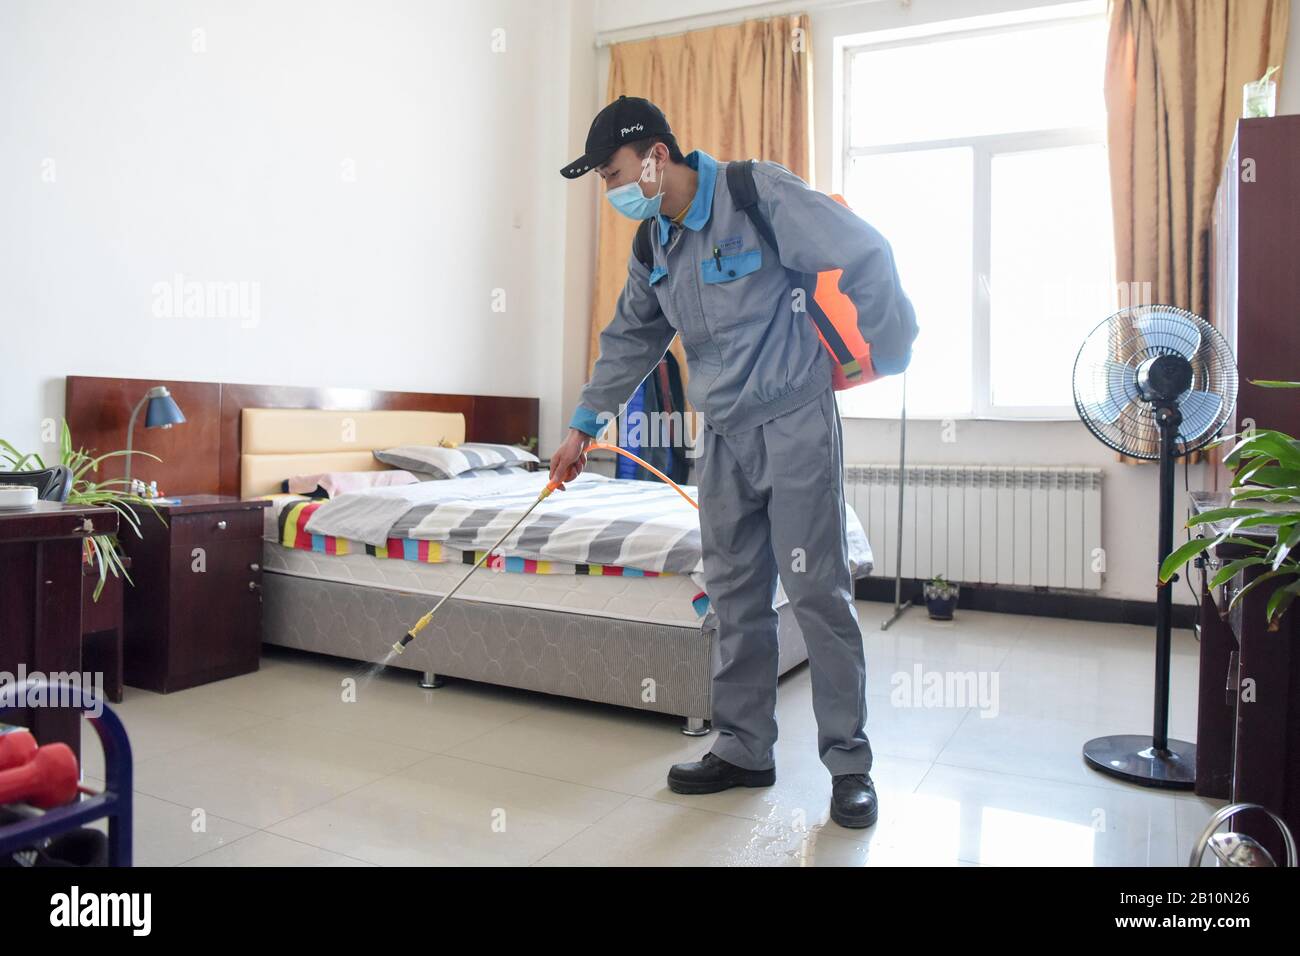 Urumqi, China's Xinjiang Uygur Autonomous Region. 22nd Feb, 2020. A staff member of the Wuhu Conch Profiles and Science Co., Ltd. disinfects a dormitory in Urumqi, northwest China's Xinjiang Uygur Autonomous Region, Feb. 22, 2020. Some companies in Urumqi have resumed production amid strict prevention and control measures against the novel coronavirus. Credit: Ding Lei/Xinhua/Alamy Live News Stock Photo